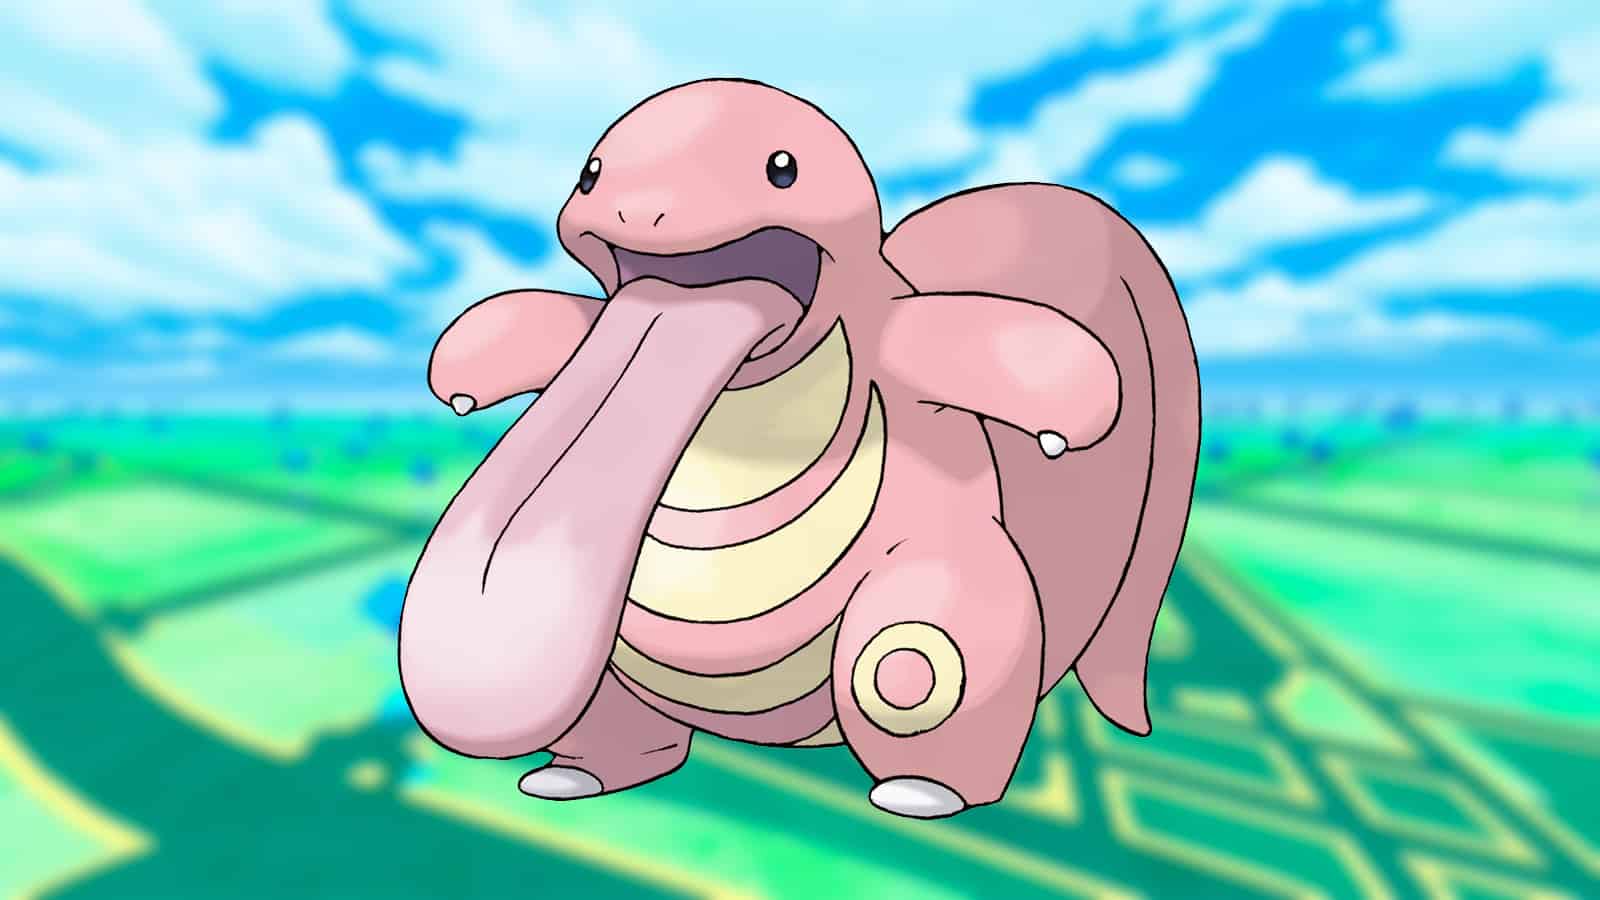 Lickitung in the Pokemon Go Kanto Cup